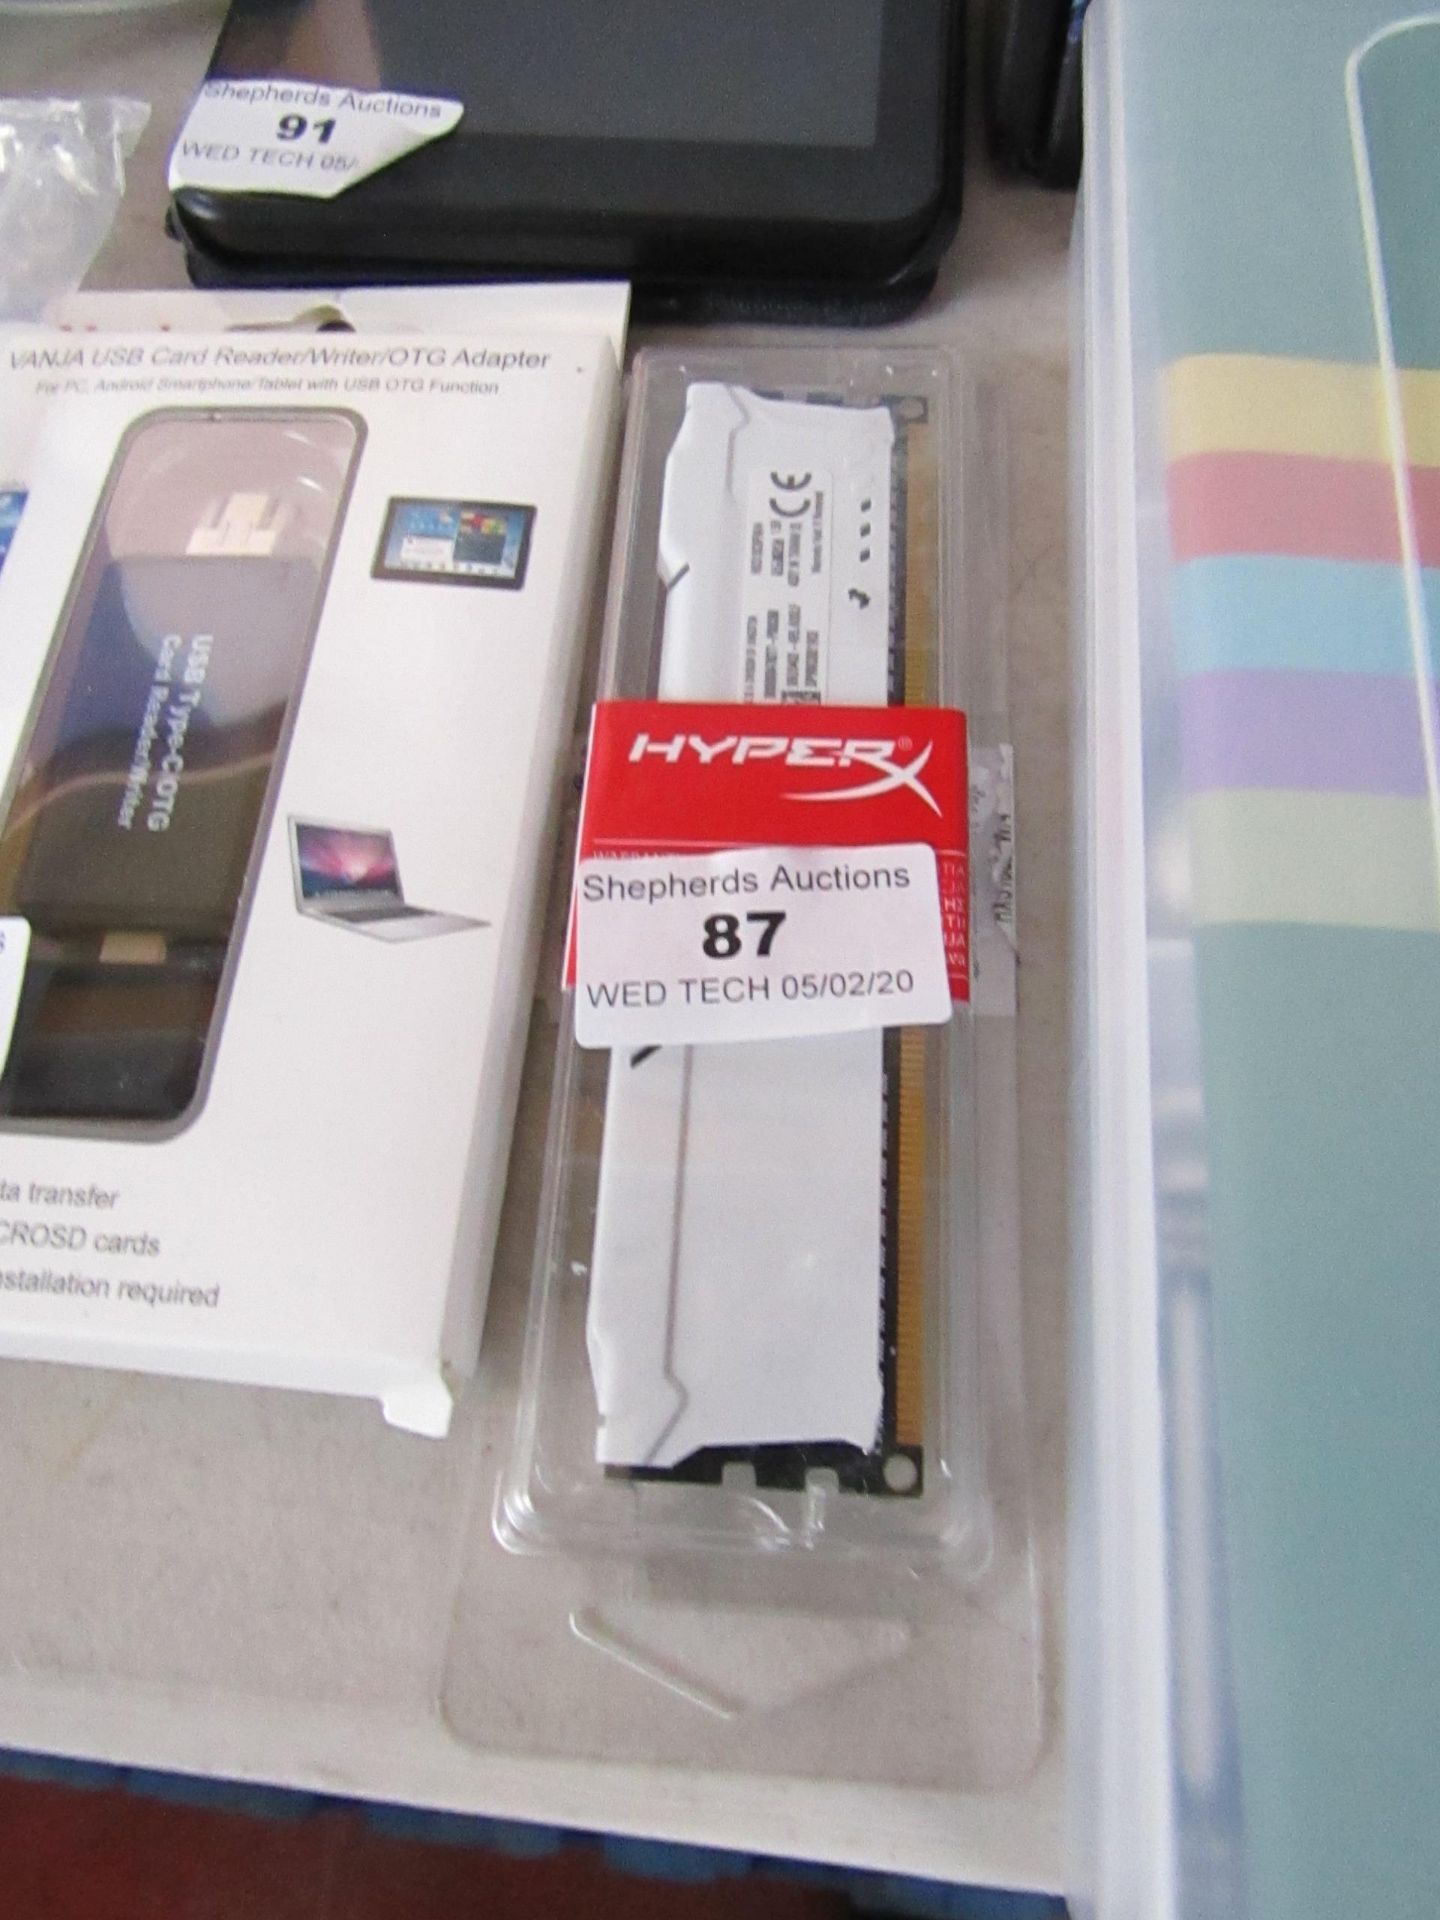 Hyper X 4GB memory module, untested and packaged.